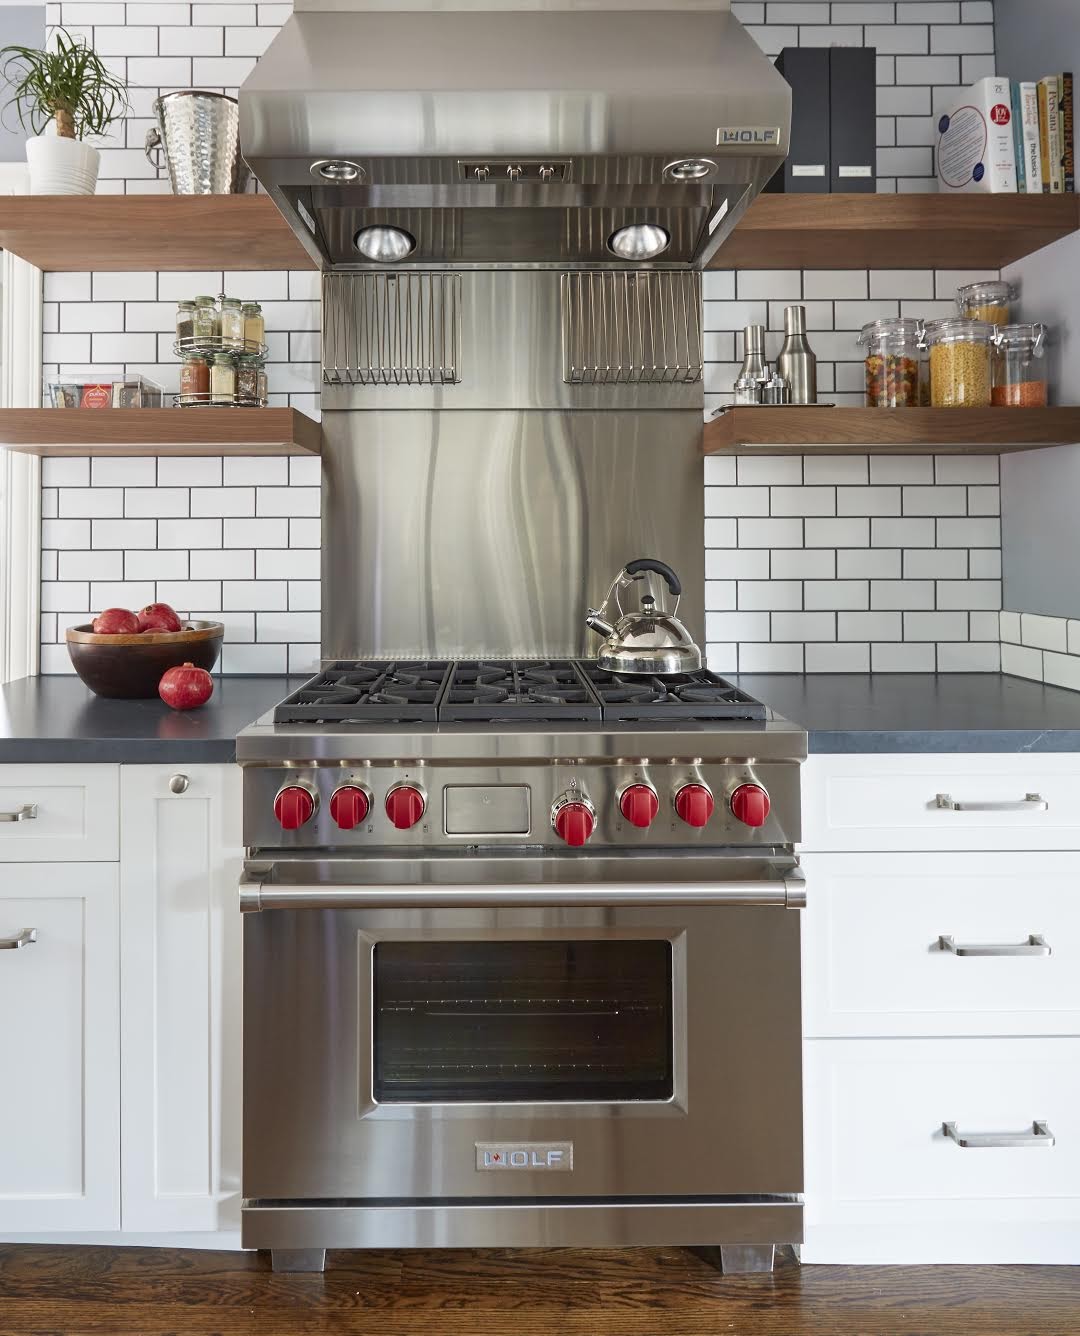 The Top High-End Appliance Brands for Your Upscale Kitchen Remodel - Wolf Range